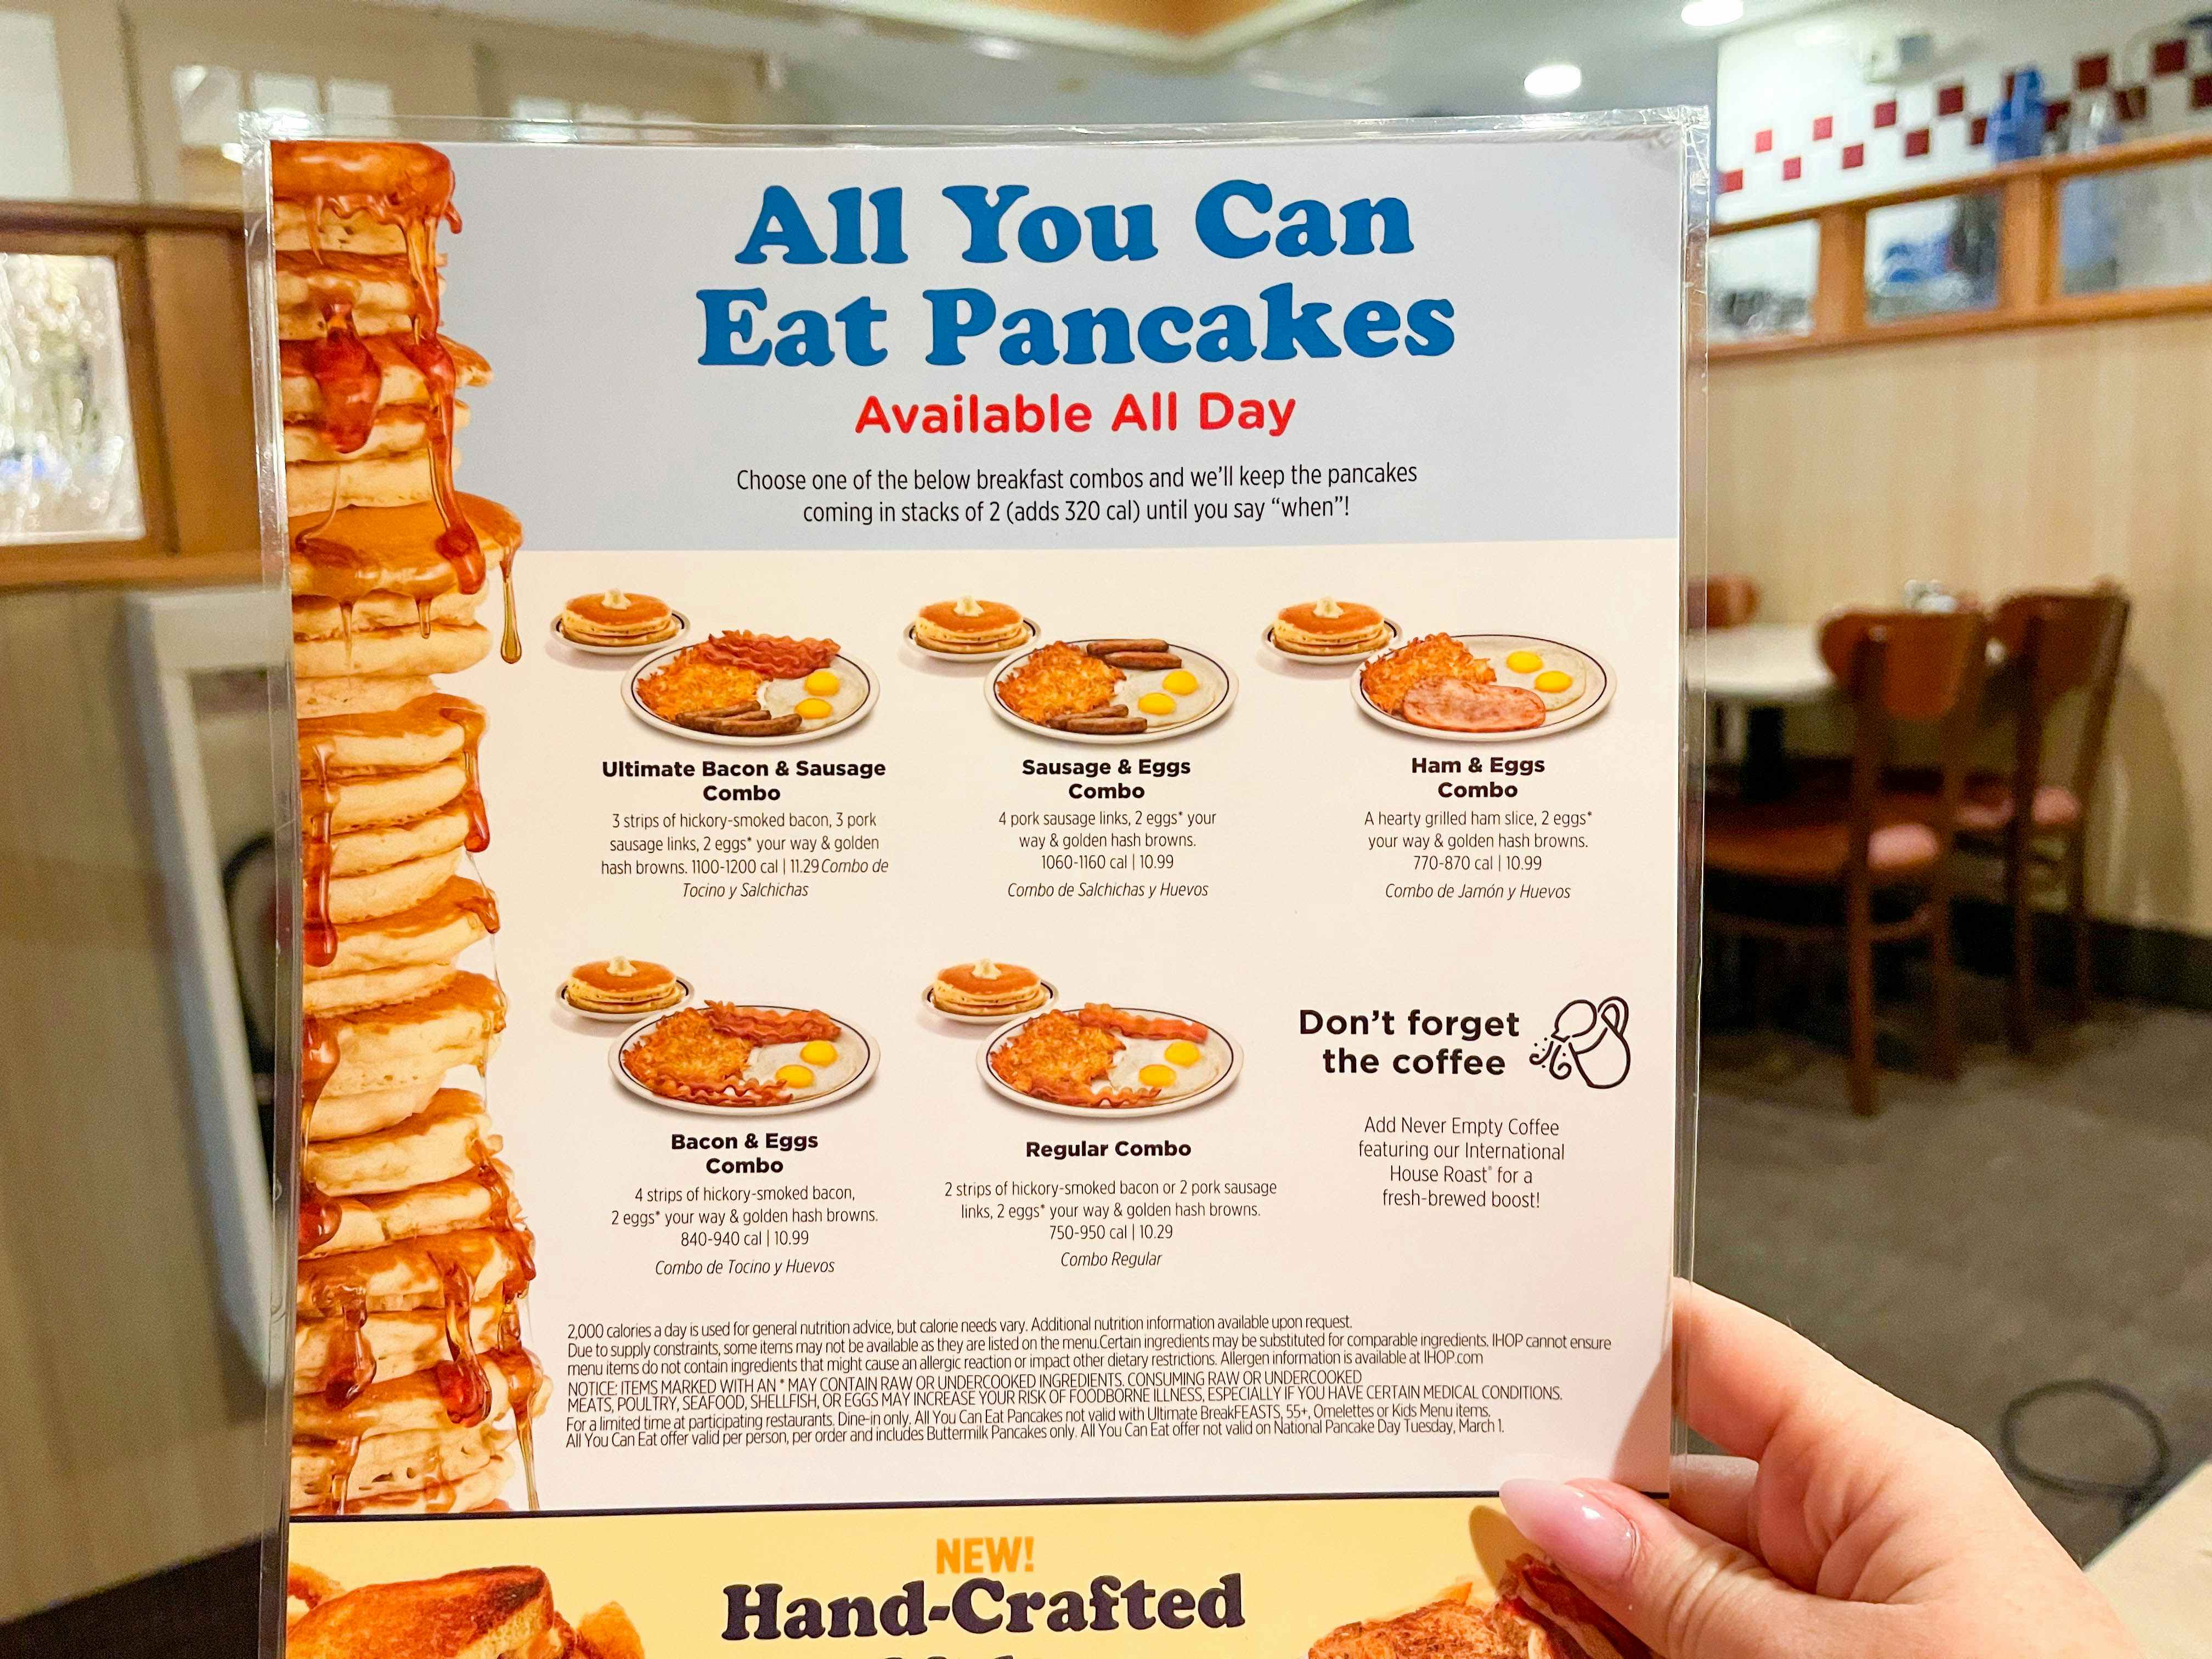 IHOP Celebrates 65 Years With $5 All-You-Can-Eat Pancakes Deal